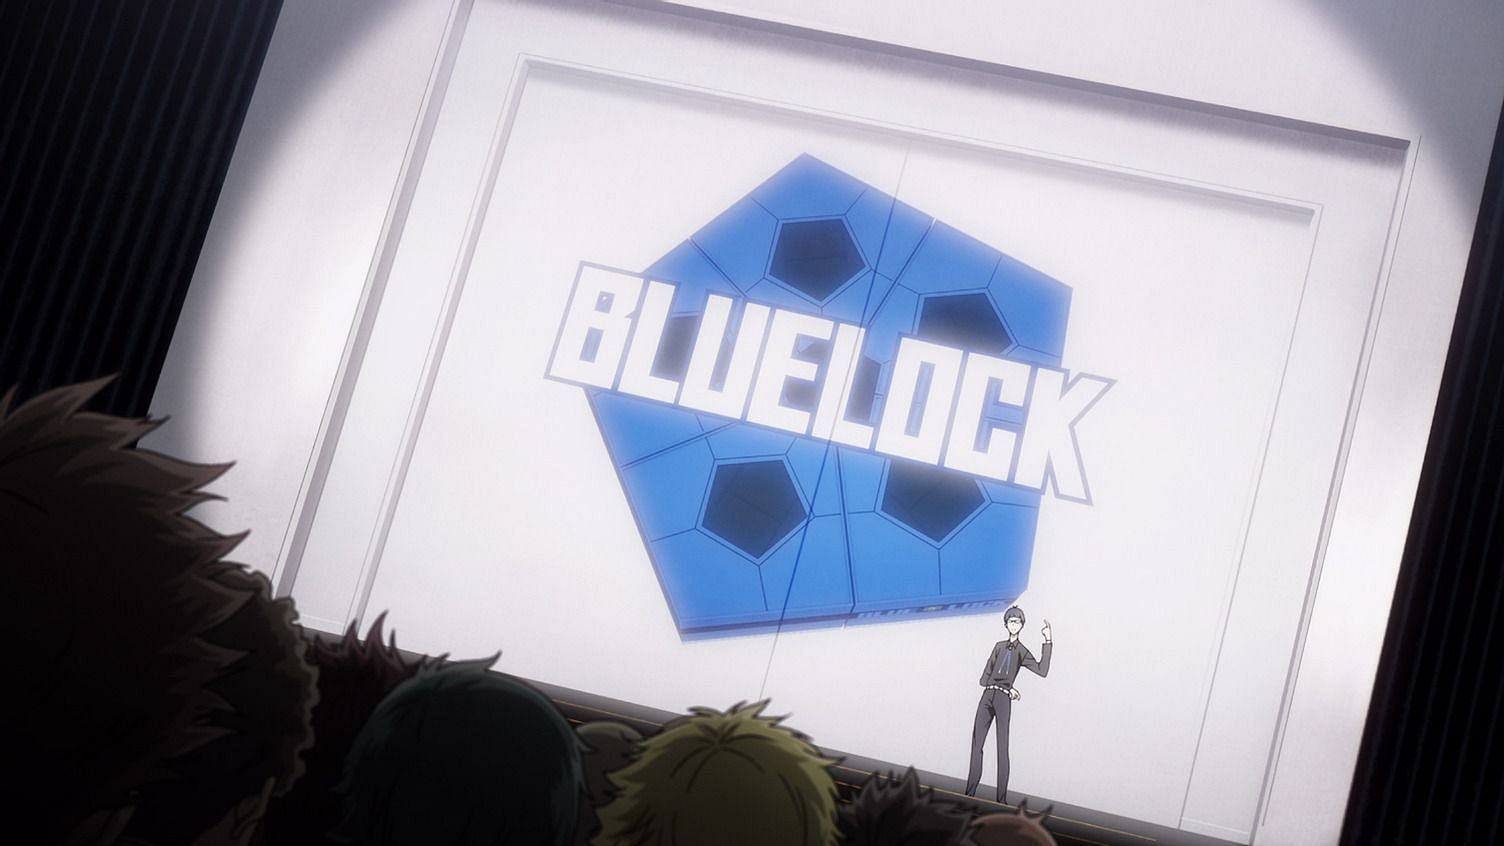 Blue Lock Reveals Three Additional Voice Cast Members & Characters